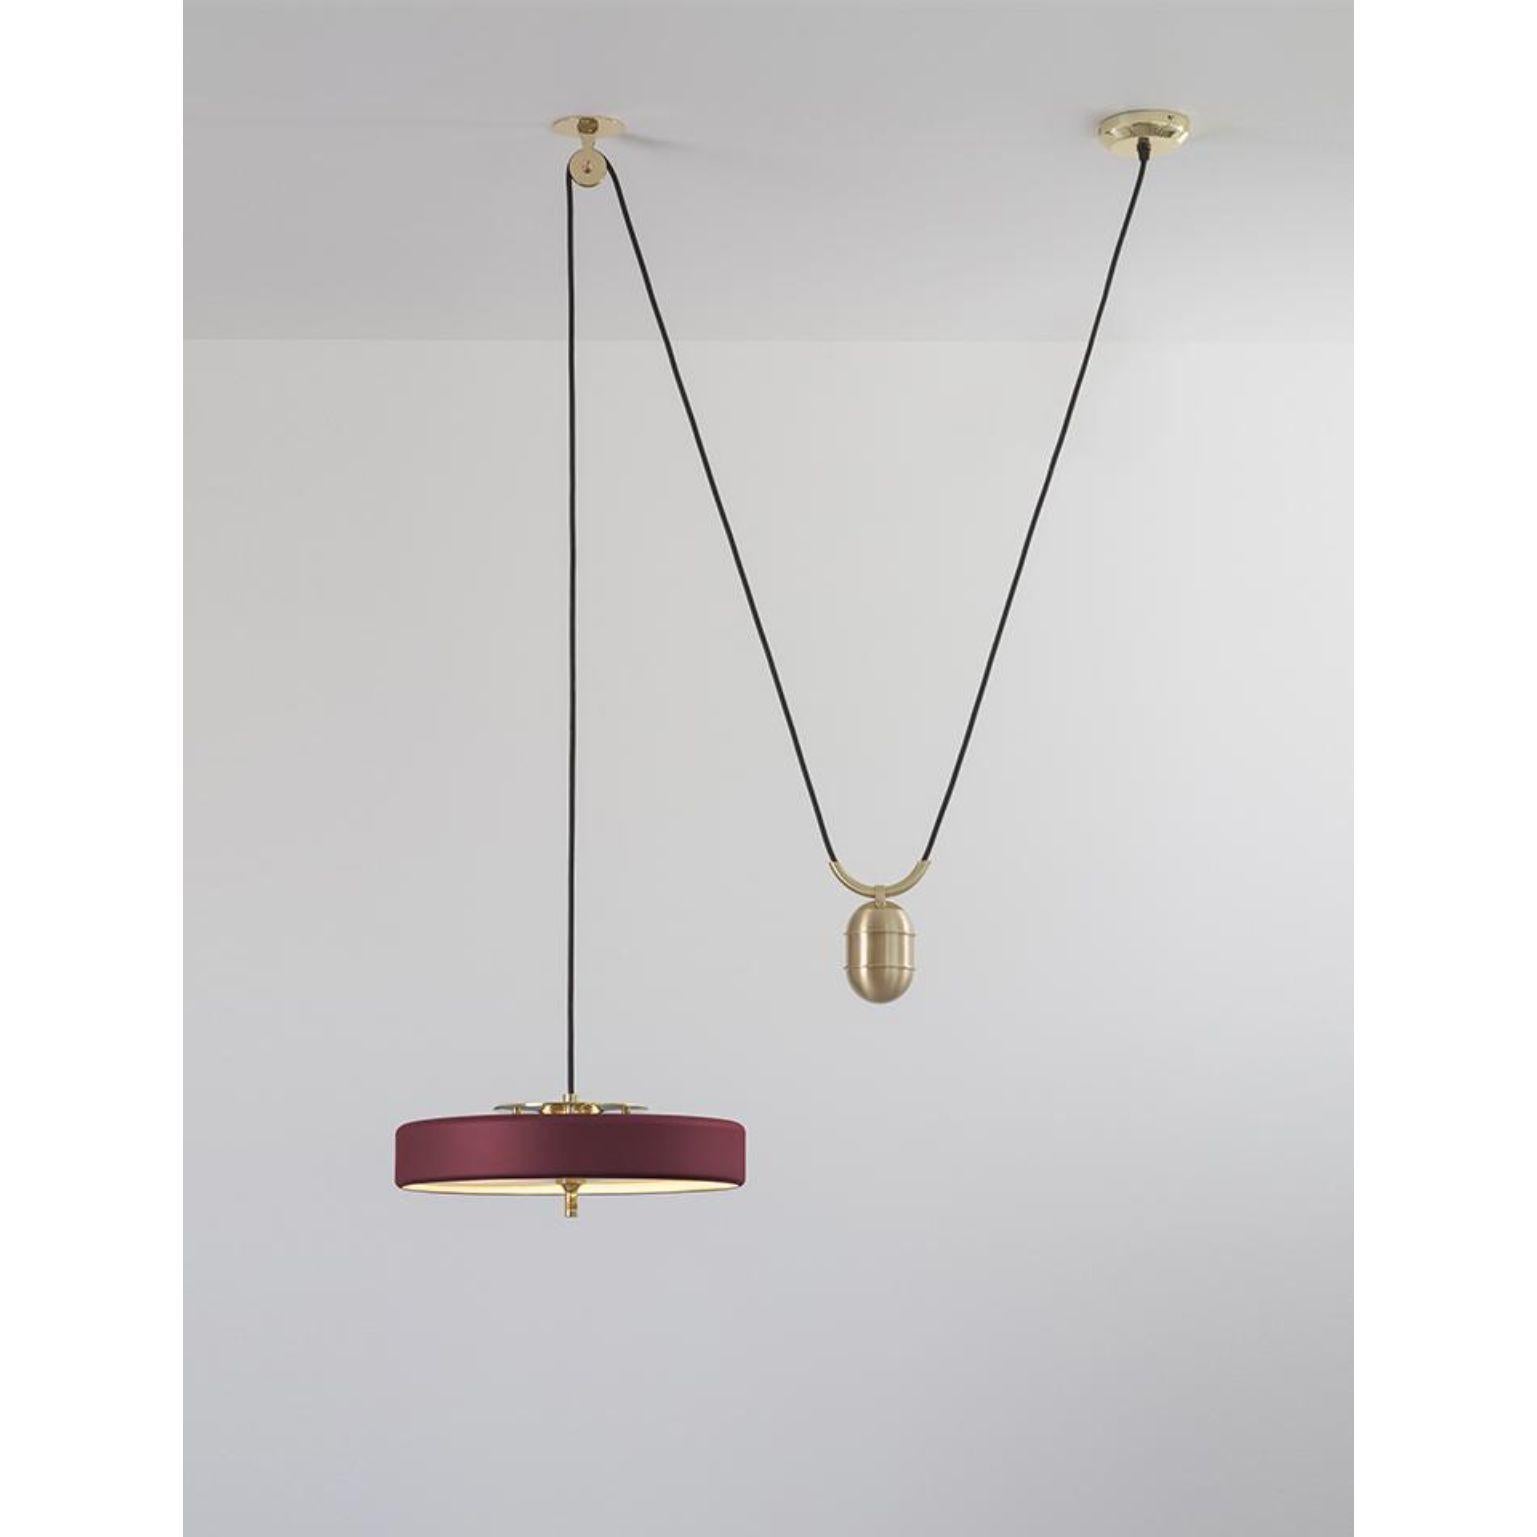 Revolve rise and fall pendant light - brushed brass - oxblood by Bert Frank
Dimensions: 30 x 35 x 11 cm, small lamp: 7.6 cm
Materials: Brass, steel

Also Available in polished brass
When Adam Yeats and Robbie Llewellyn founded Bert Frank in